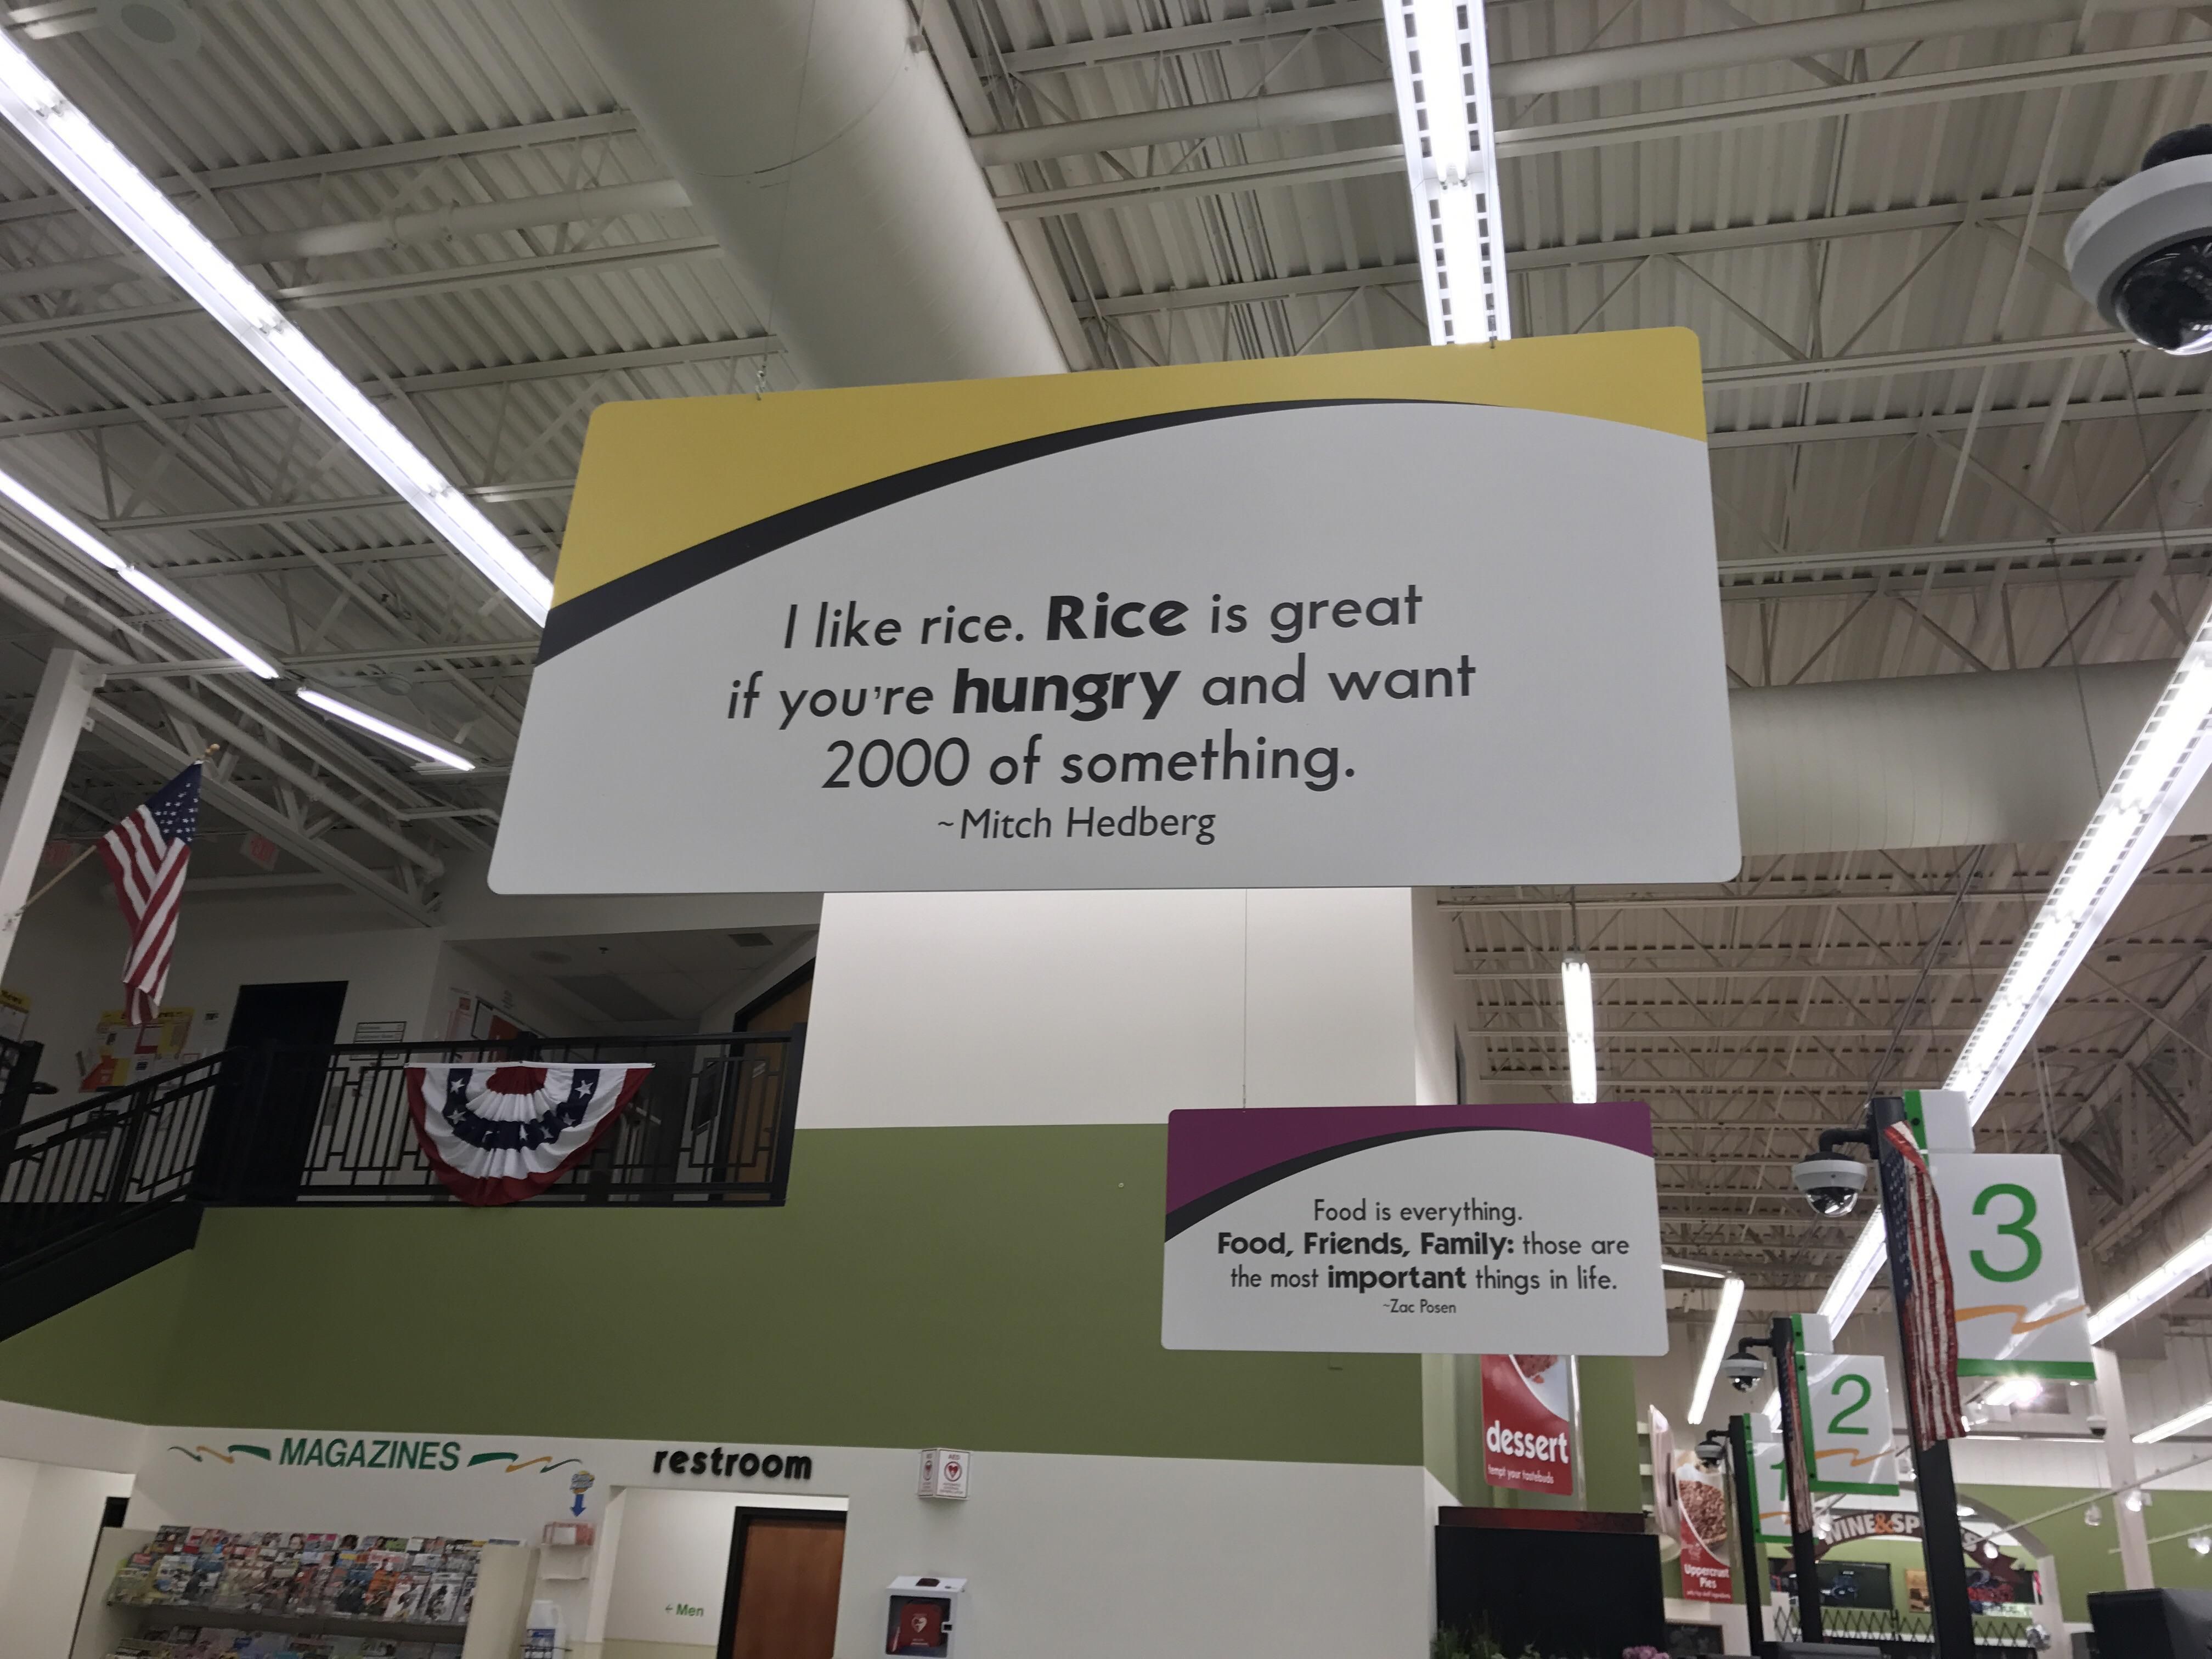 Good to see Mitch Hedberg getting props at our local grocery store.